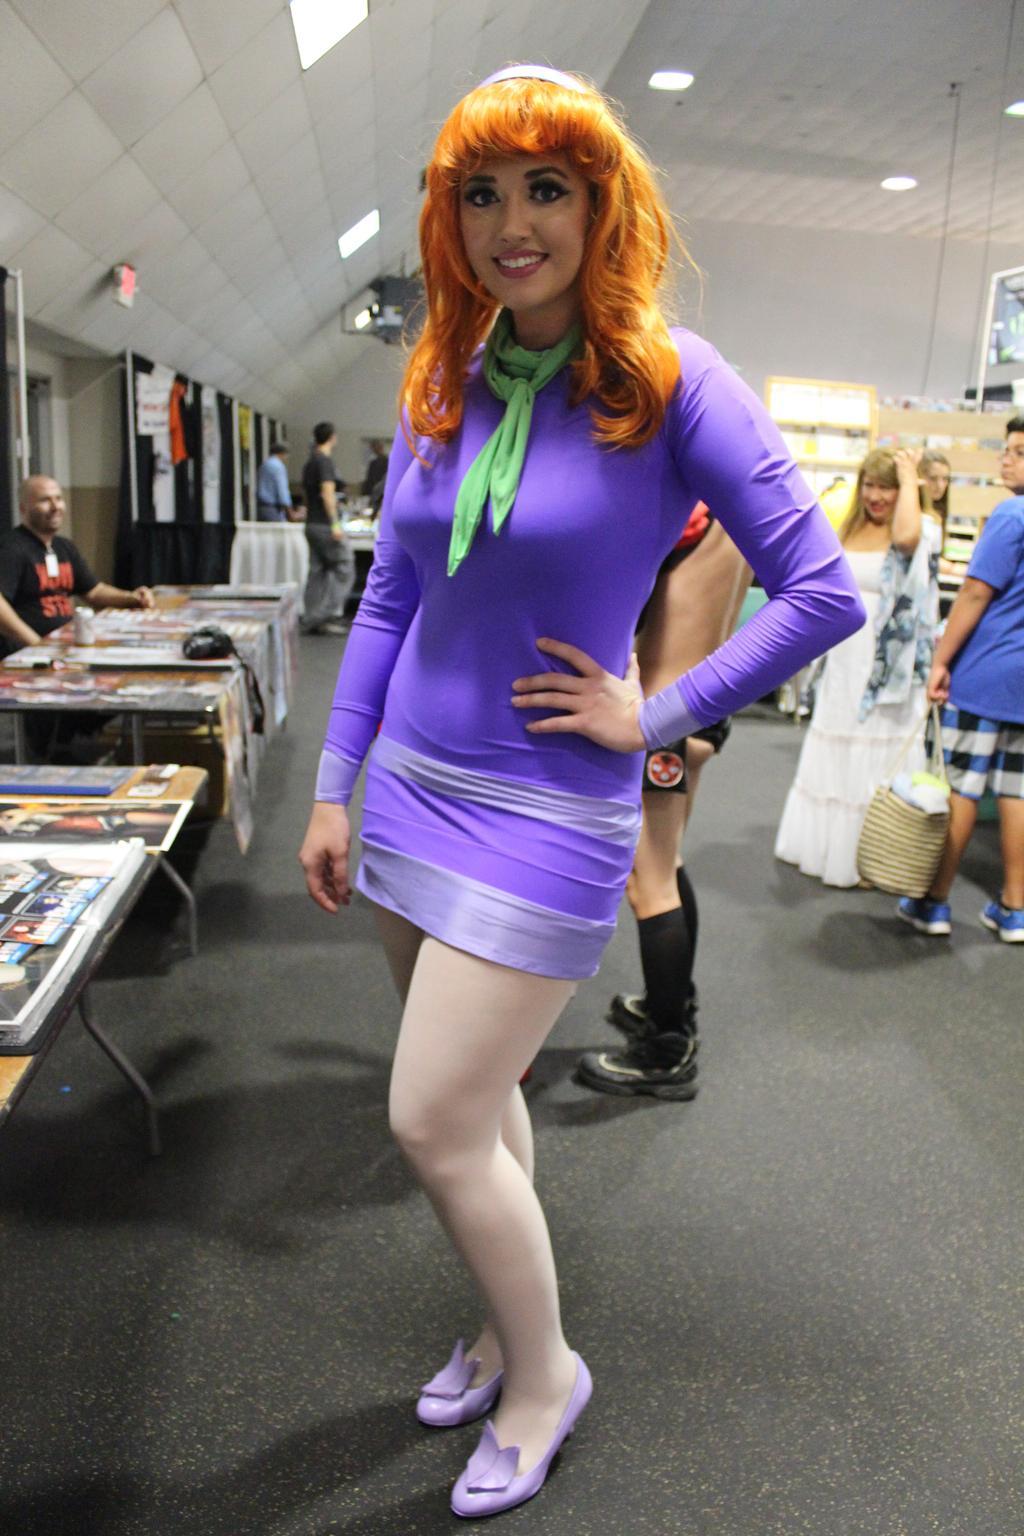 70+ Hot Pictures Of Daphne Blake From Scooby Doo Which Are Sure to Catch Your Attention 45